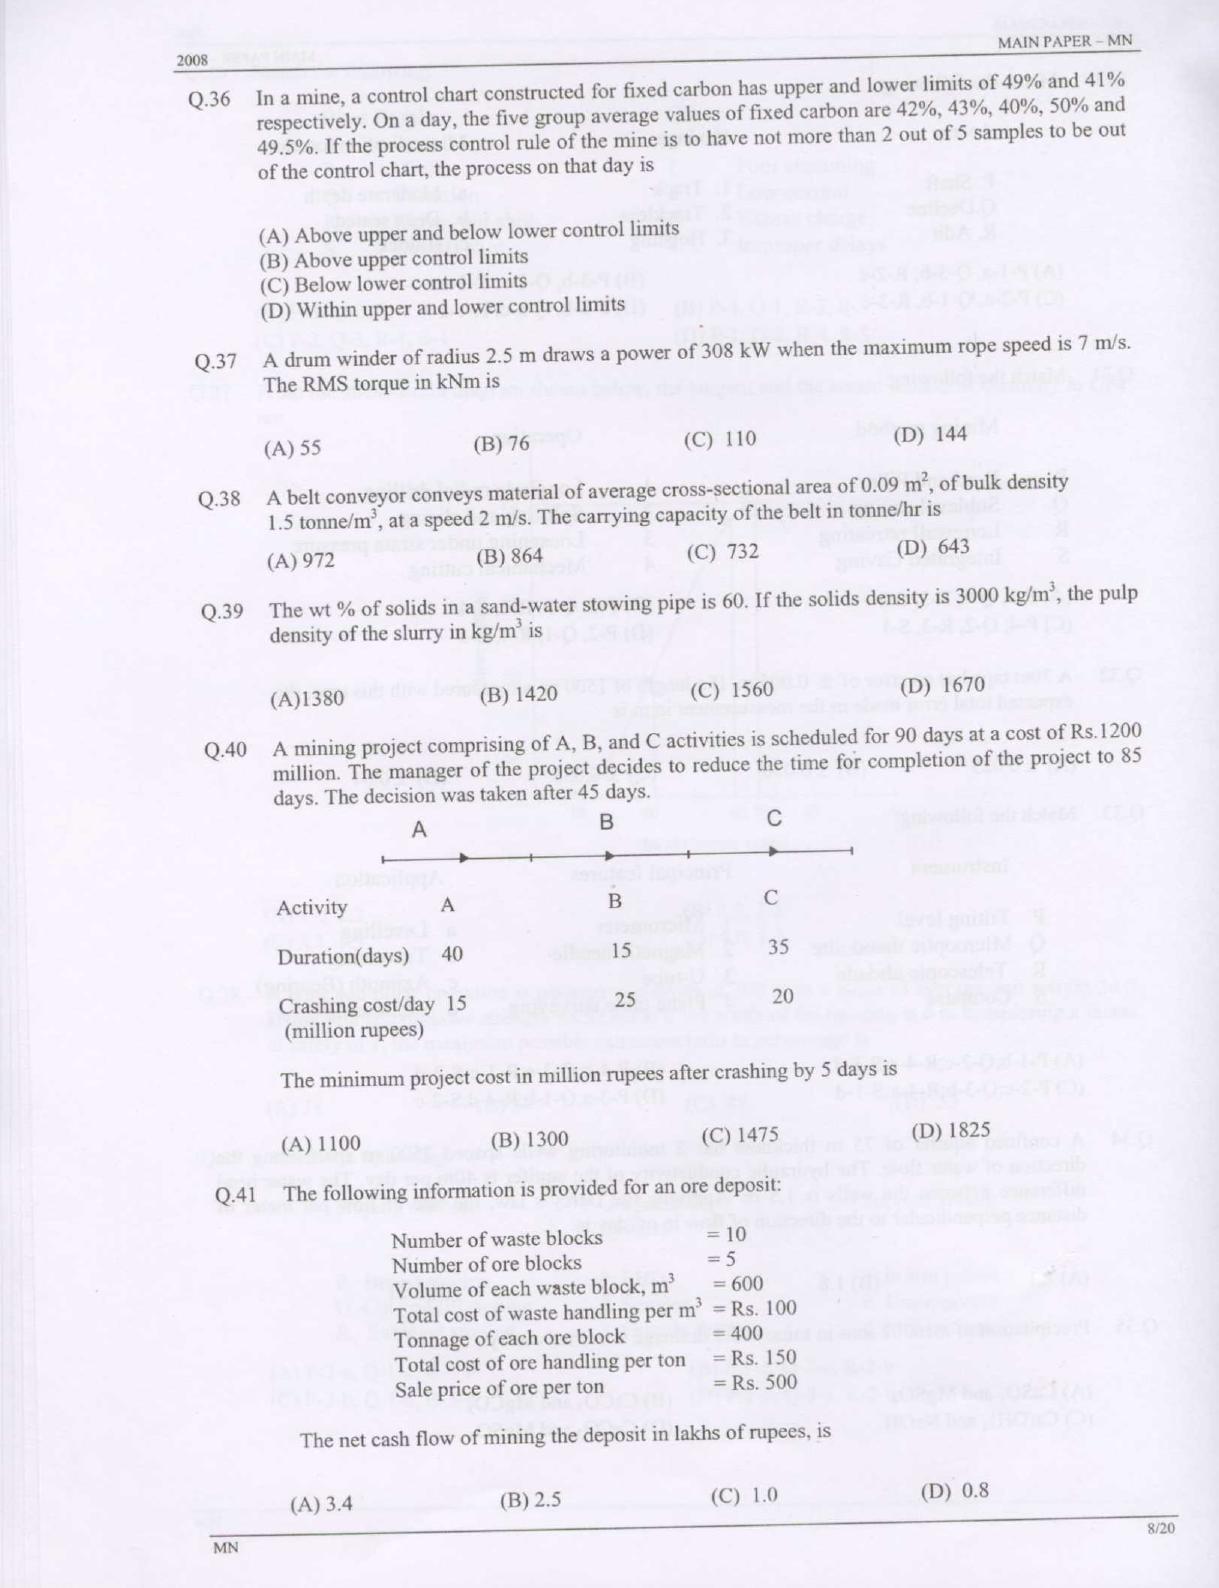 GATE 2008 Mining Engineering (MN) Question Paper with Answer Key - Page 8